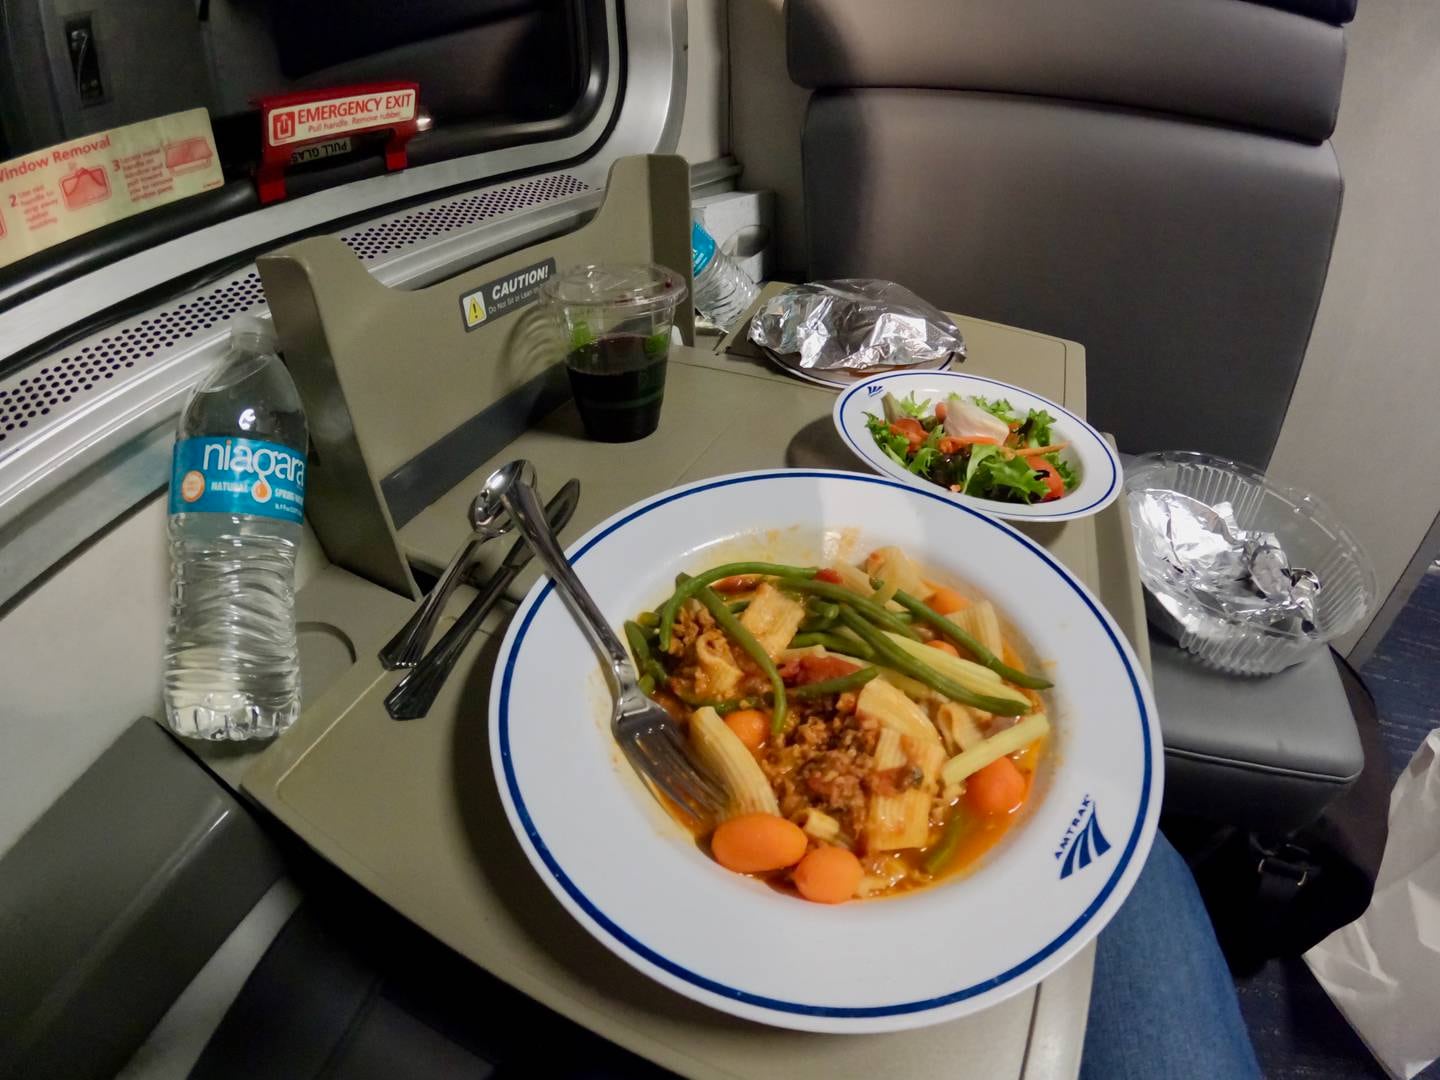 a bowl of pasta, a side salad and a plastic cup of wine on a private Amtrak room table